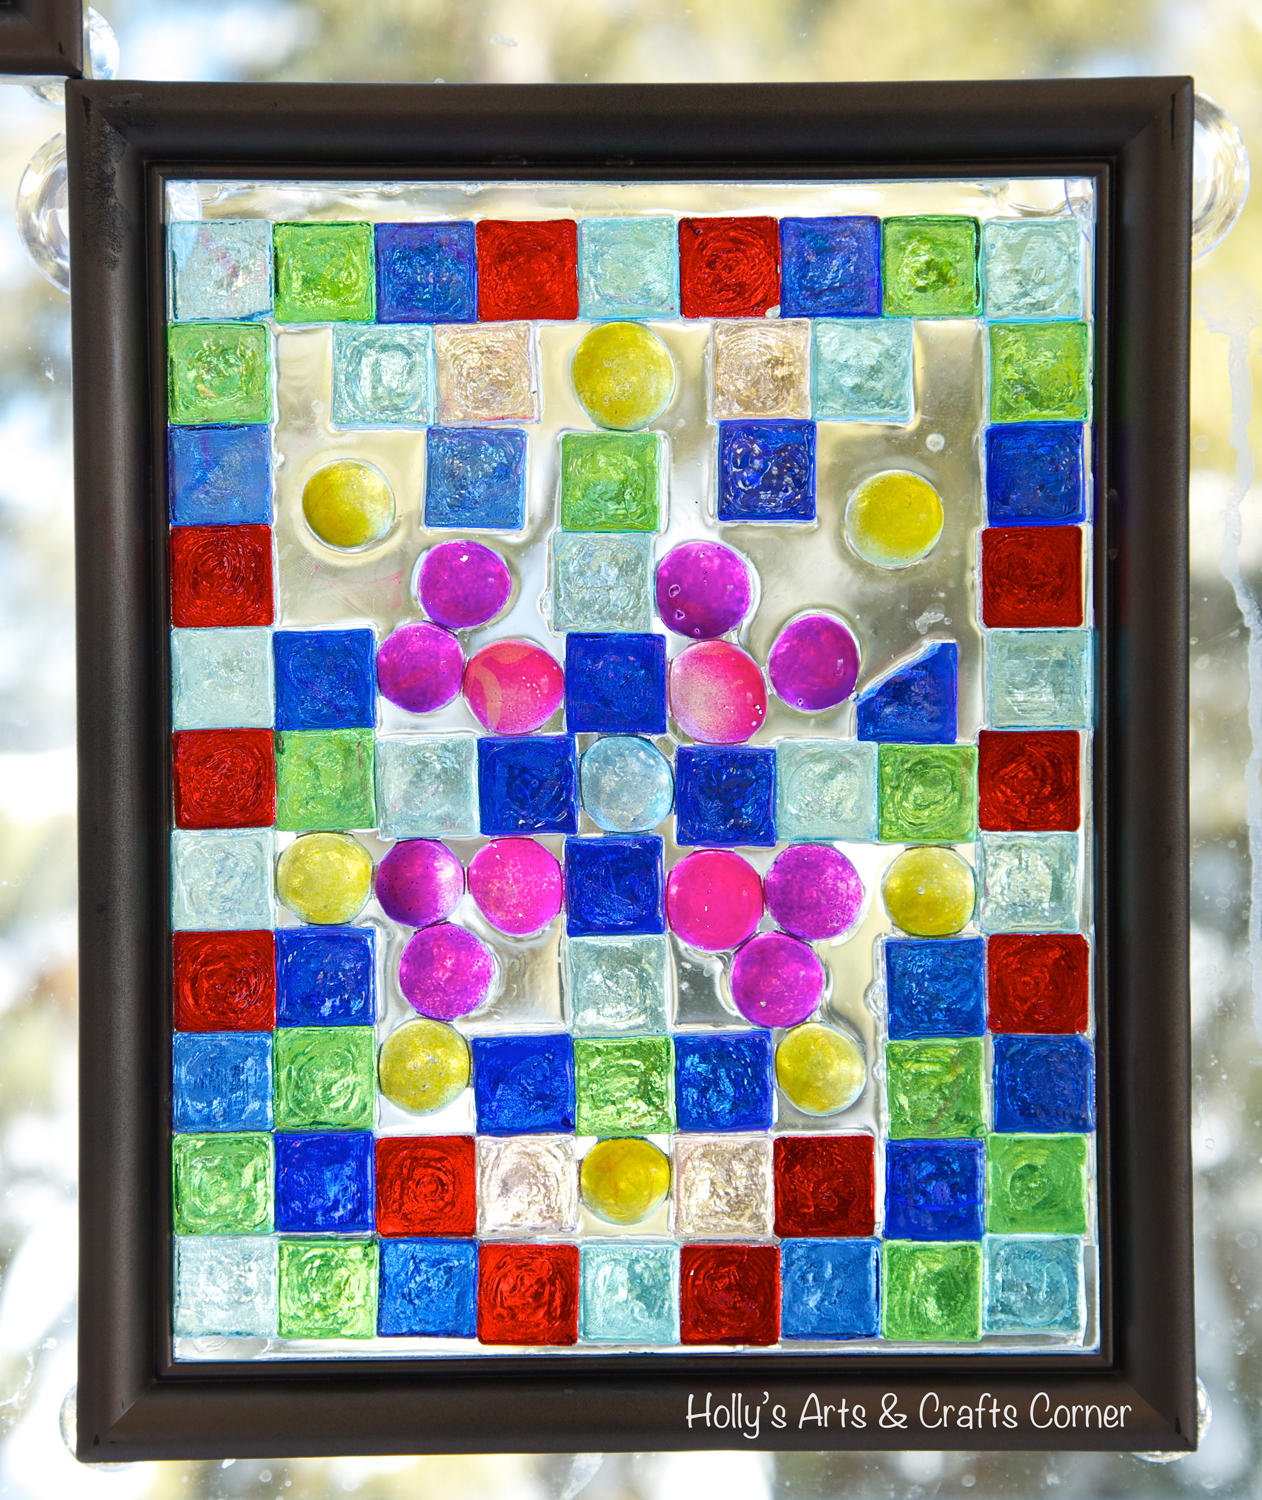 Holly's Arts and Crafts Corner: Craft Project: DIY "Faux" Stained Glass Frames